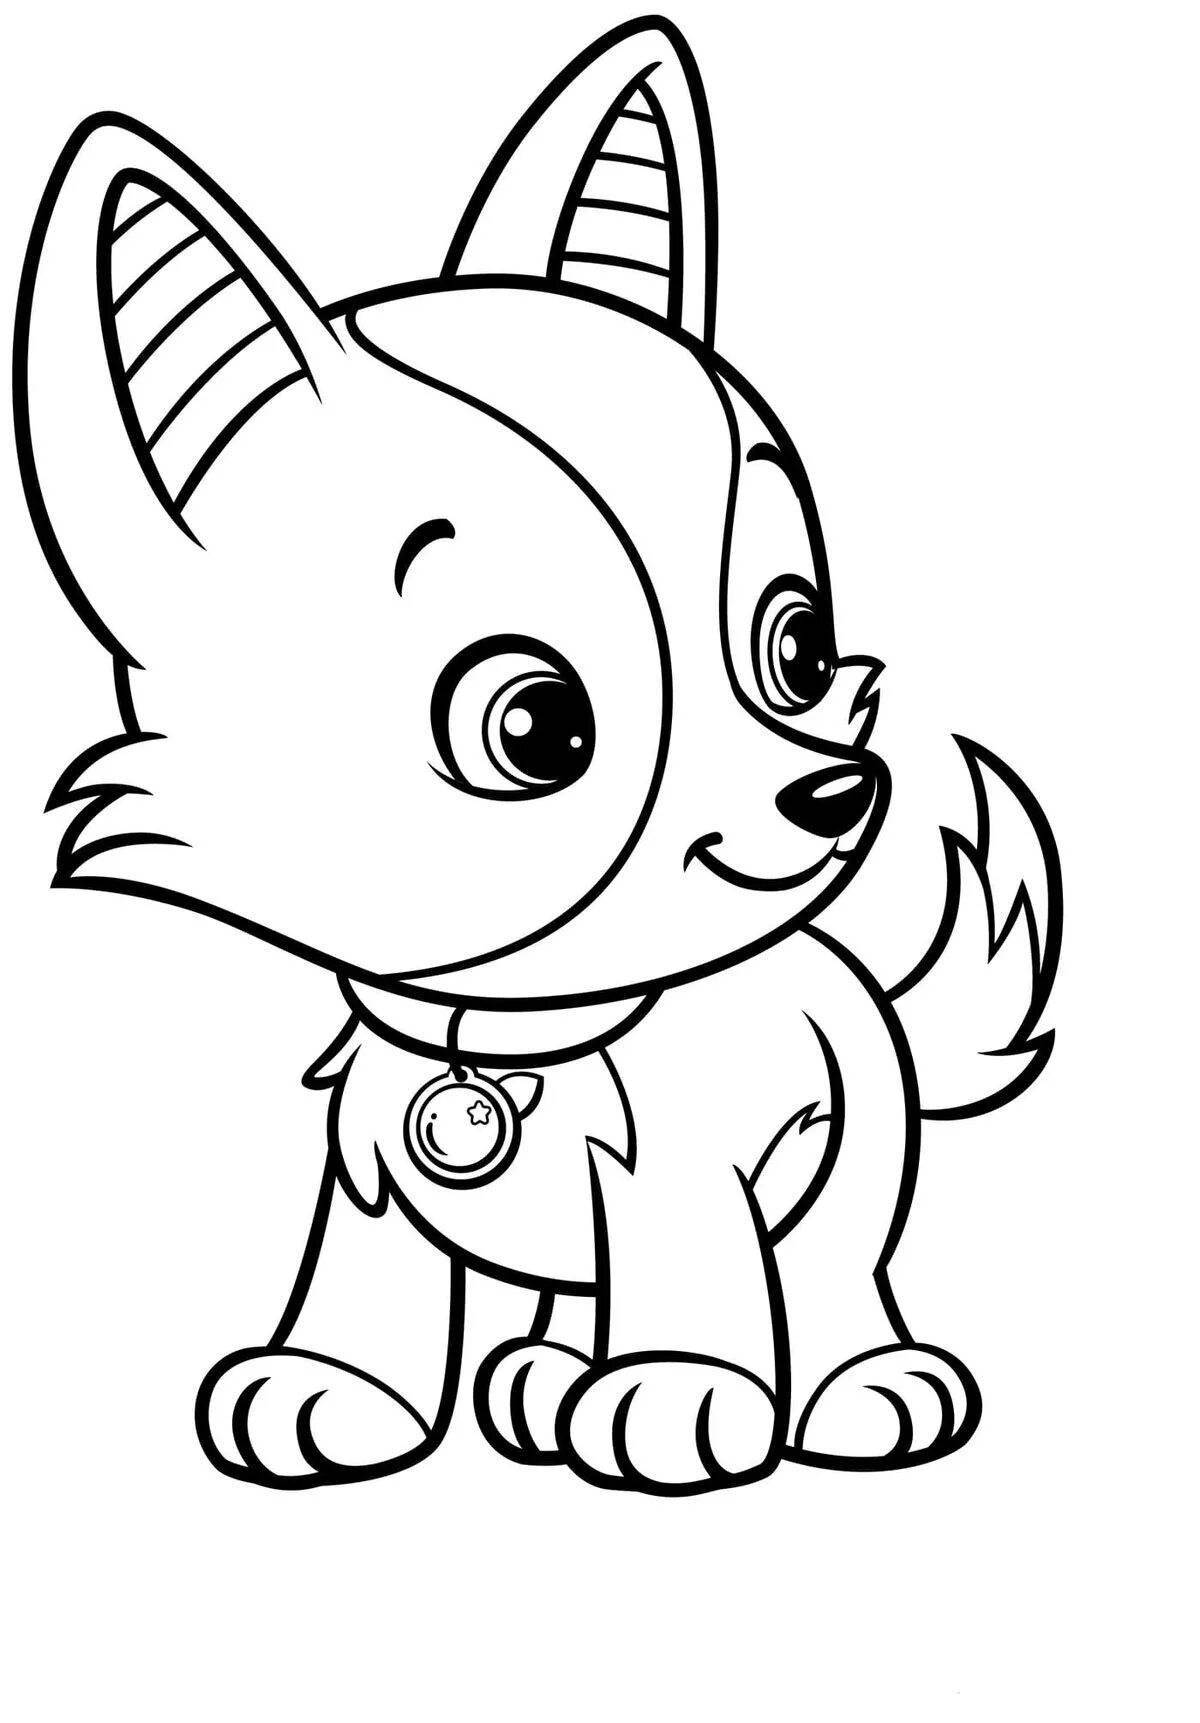 Cute cats and dogs coloring book